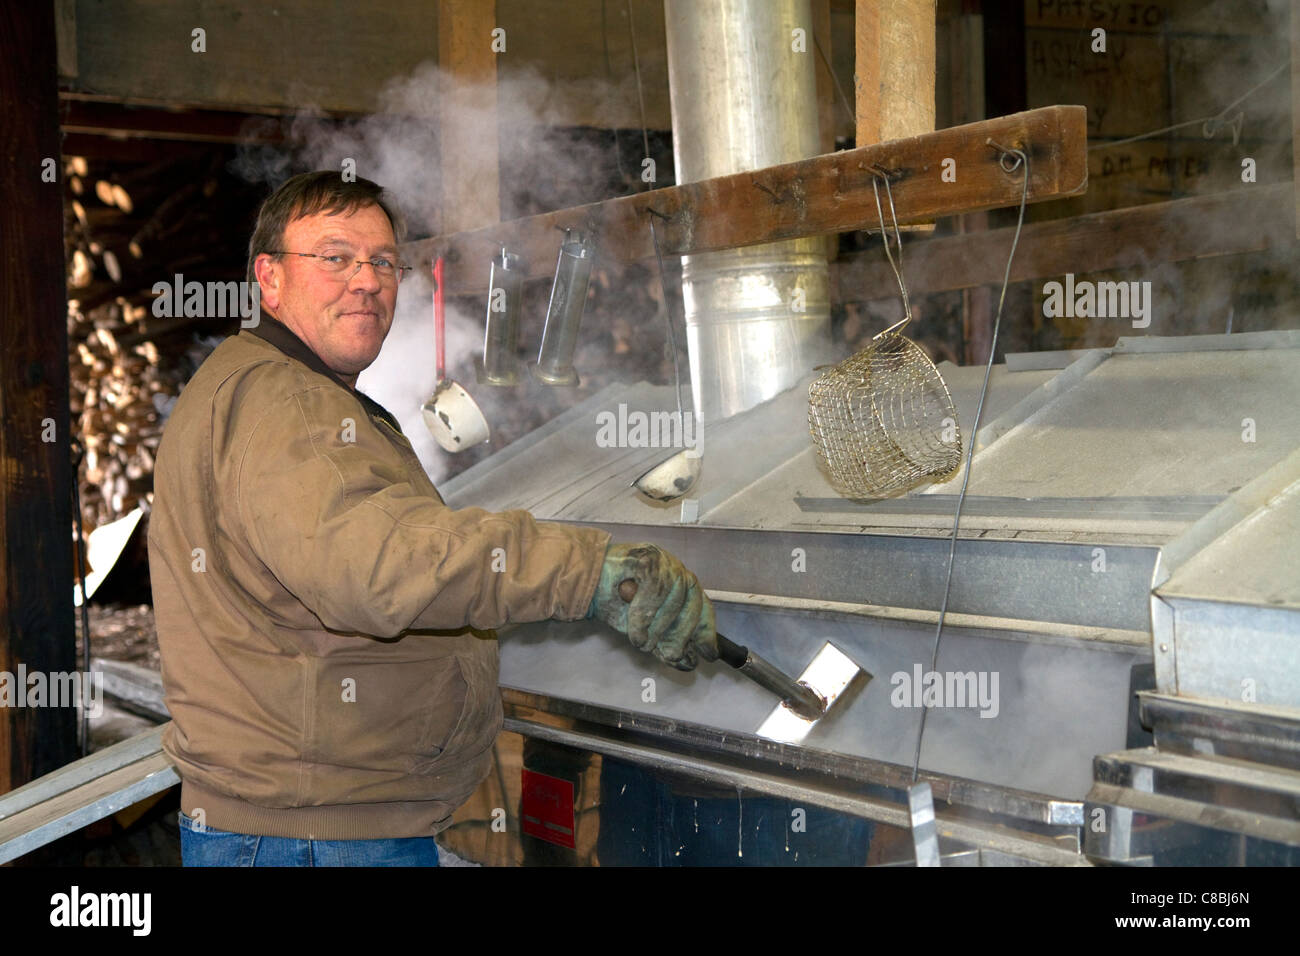 Worker boiling maple sap in a sugar shack at Lake Odessa, Michigan, USA. Stock Photo